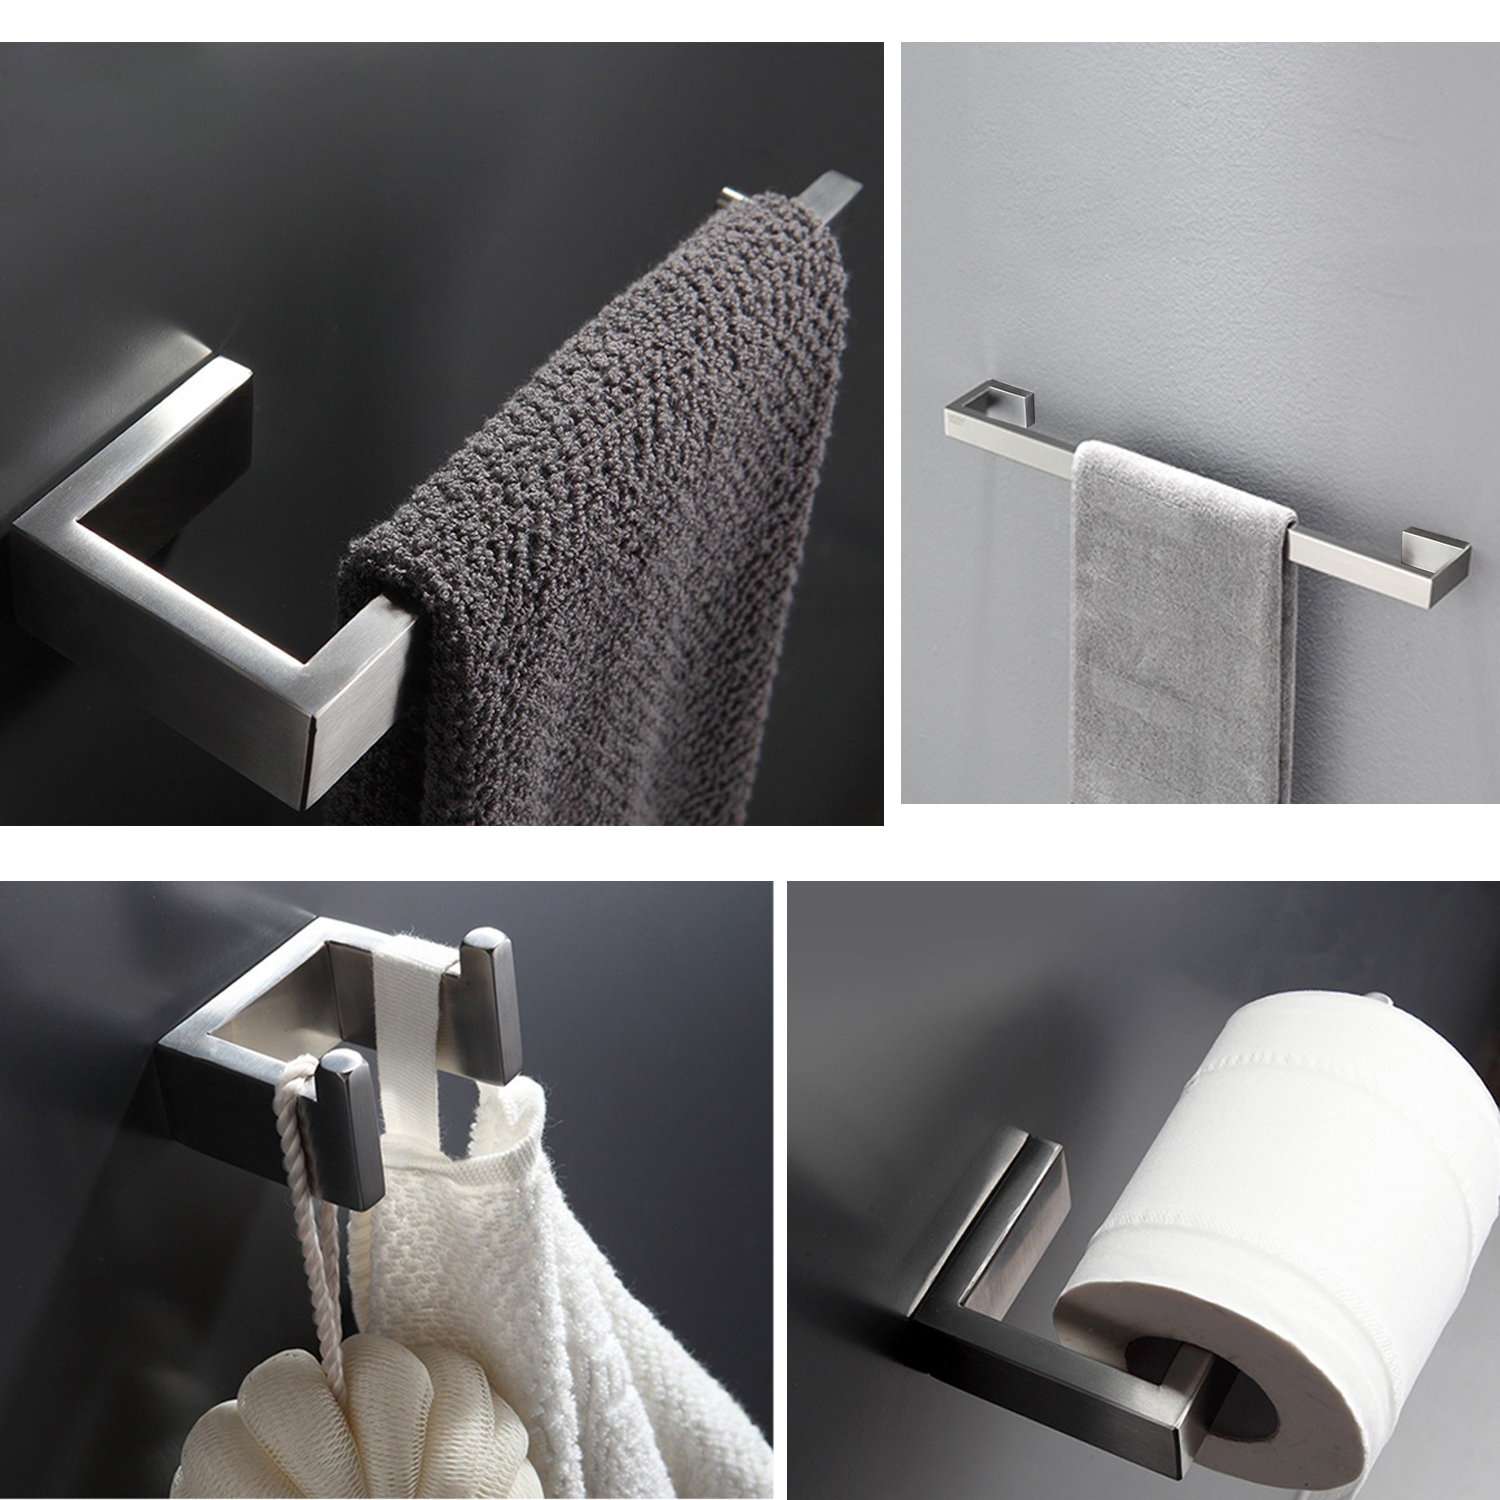 Paper Towel Holder 23-inch Towel Bar Bathroom Hardware Accessories Set 304 Stainless Steal With Towel Bar Wall Mounted Brushed Nickel Finished Towel Rack Paper Holder Robe Hook